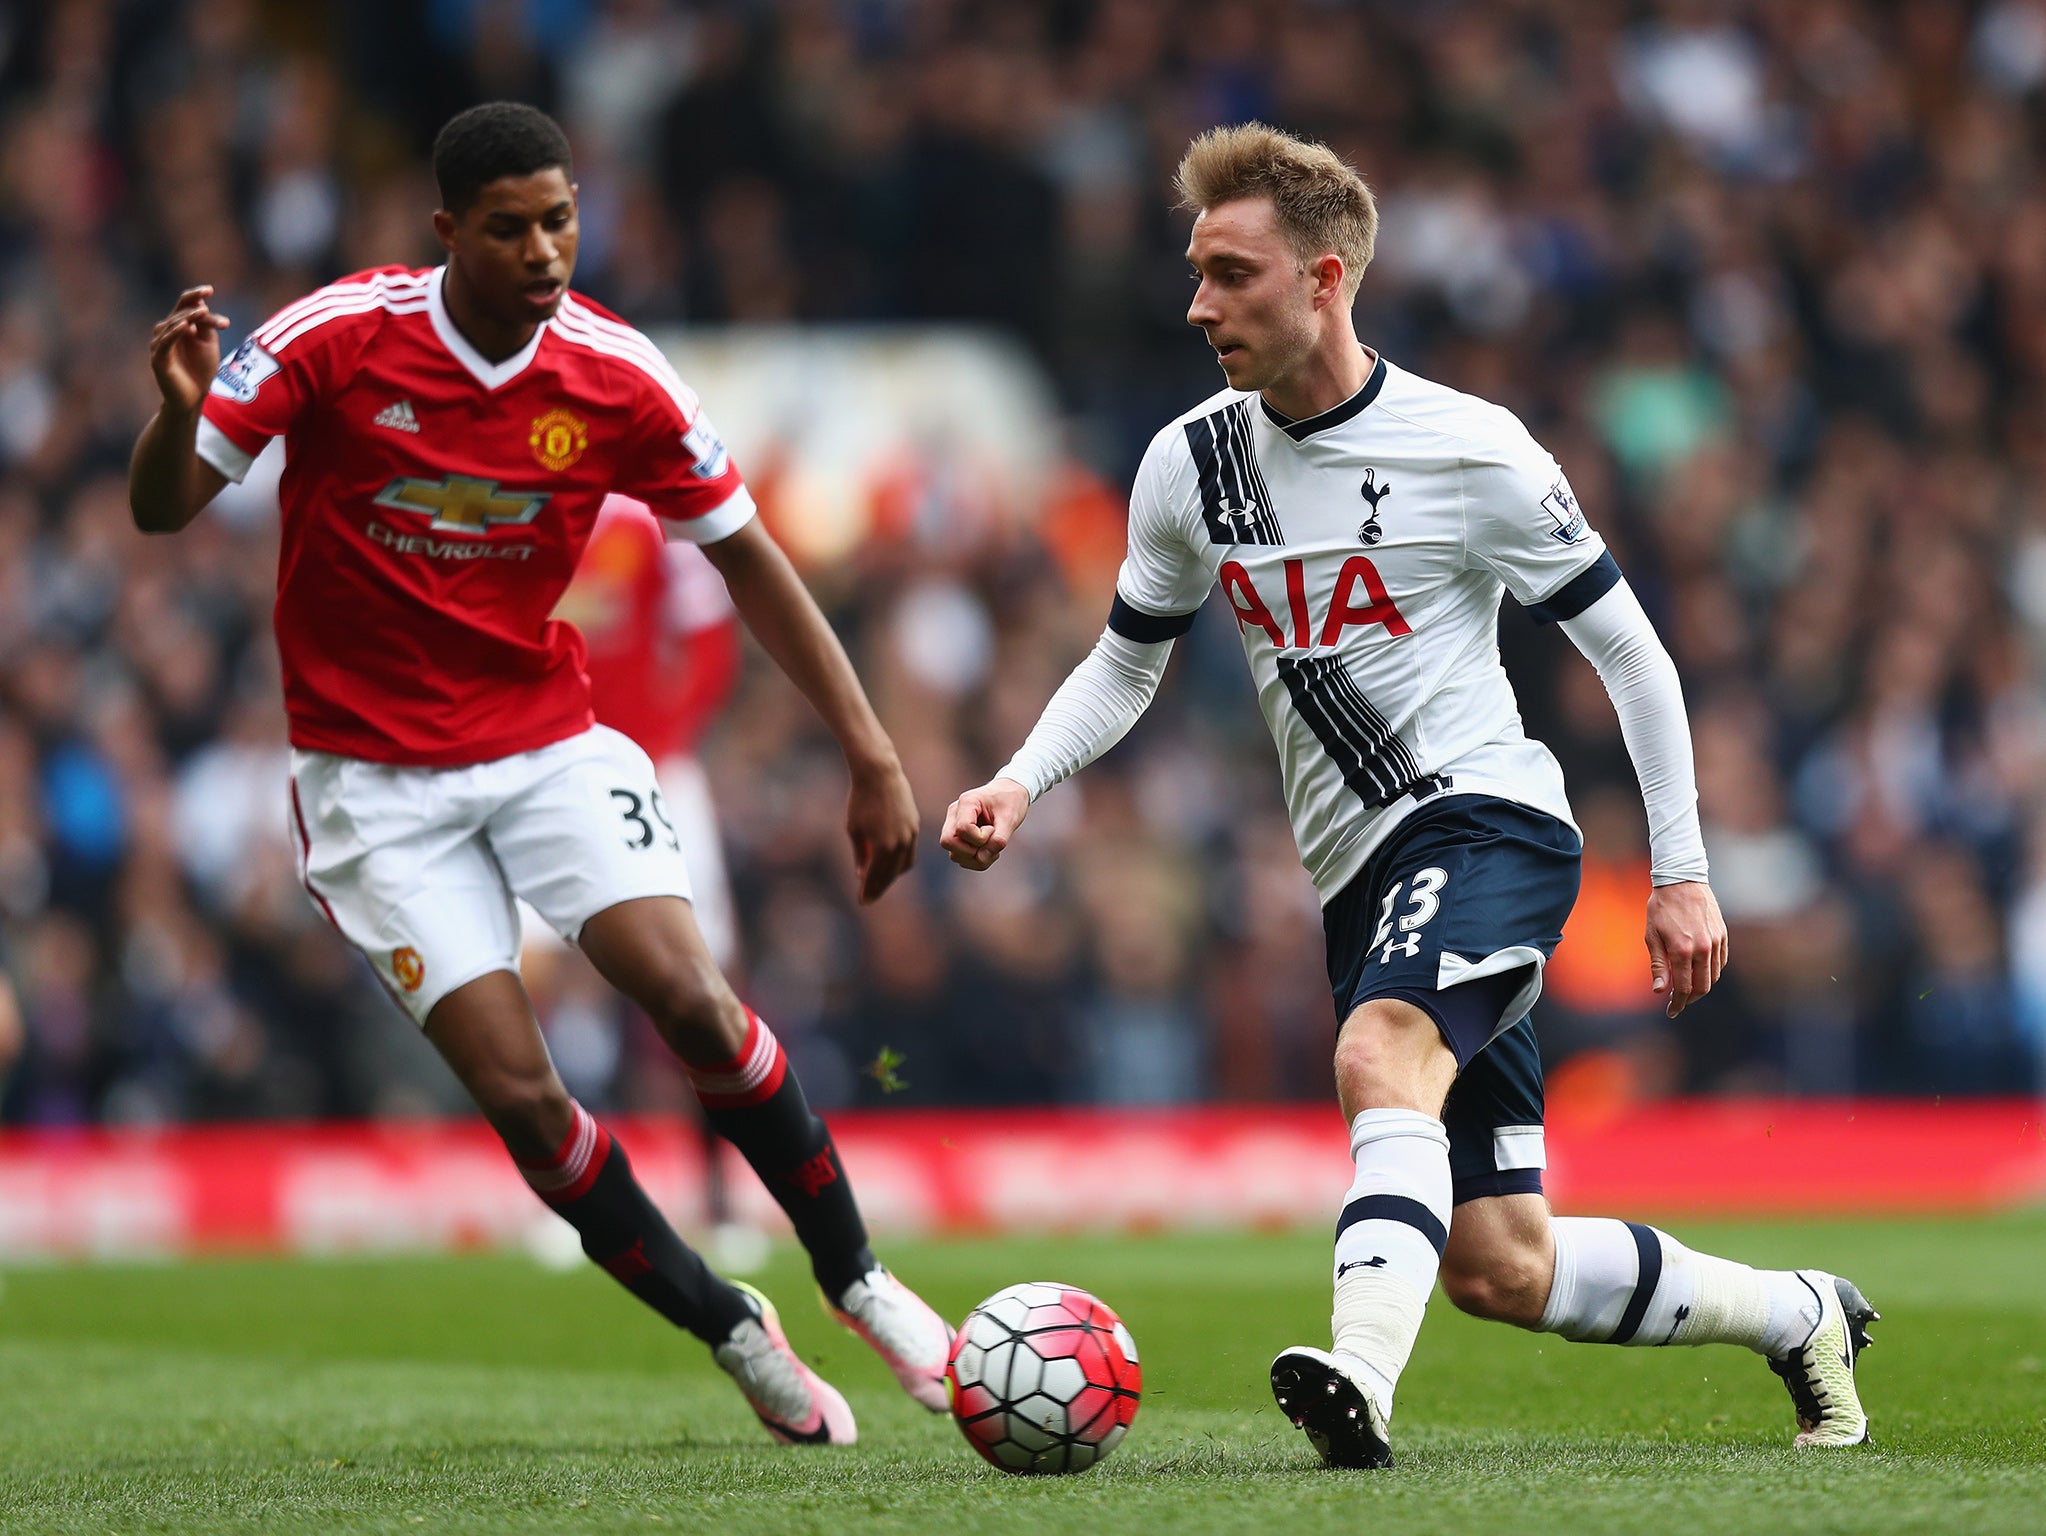 Christian Eriksen looks to play a pass for Tottenham